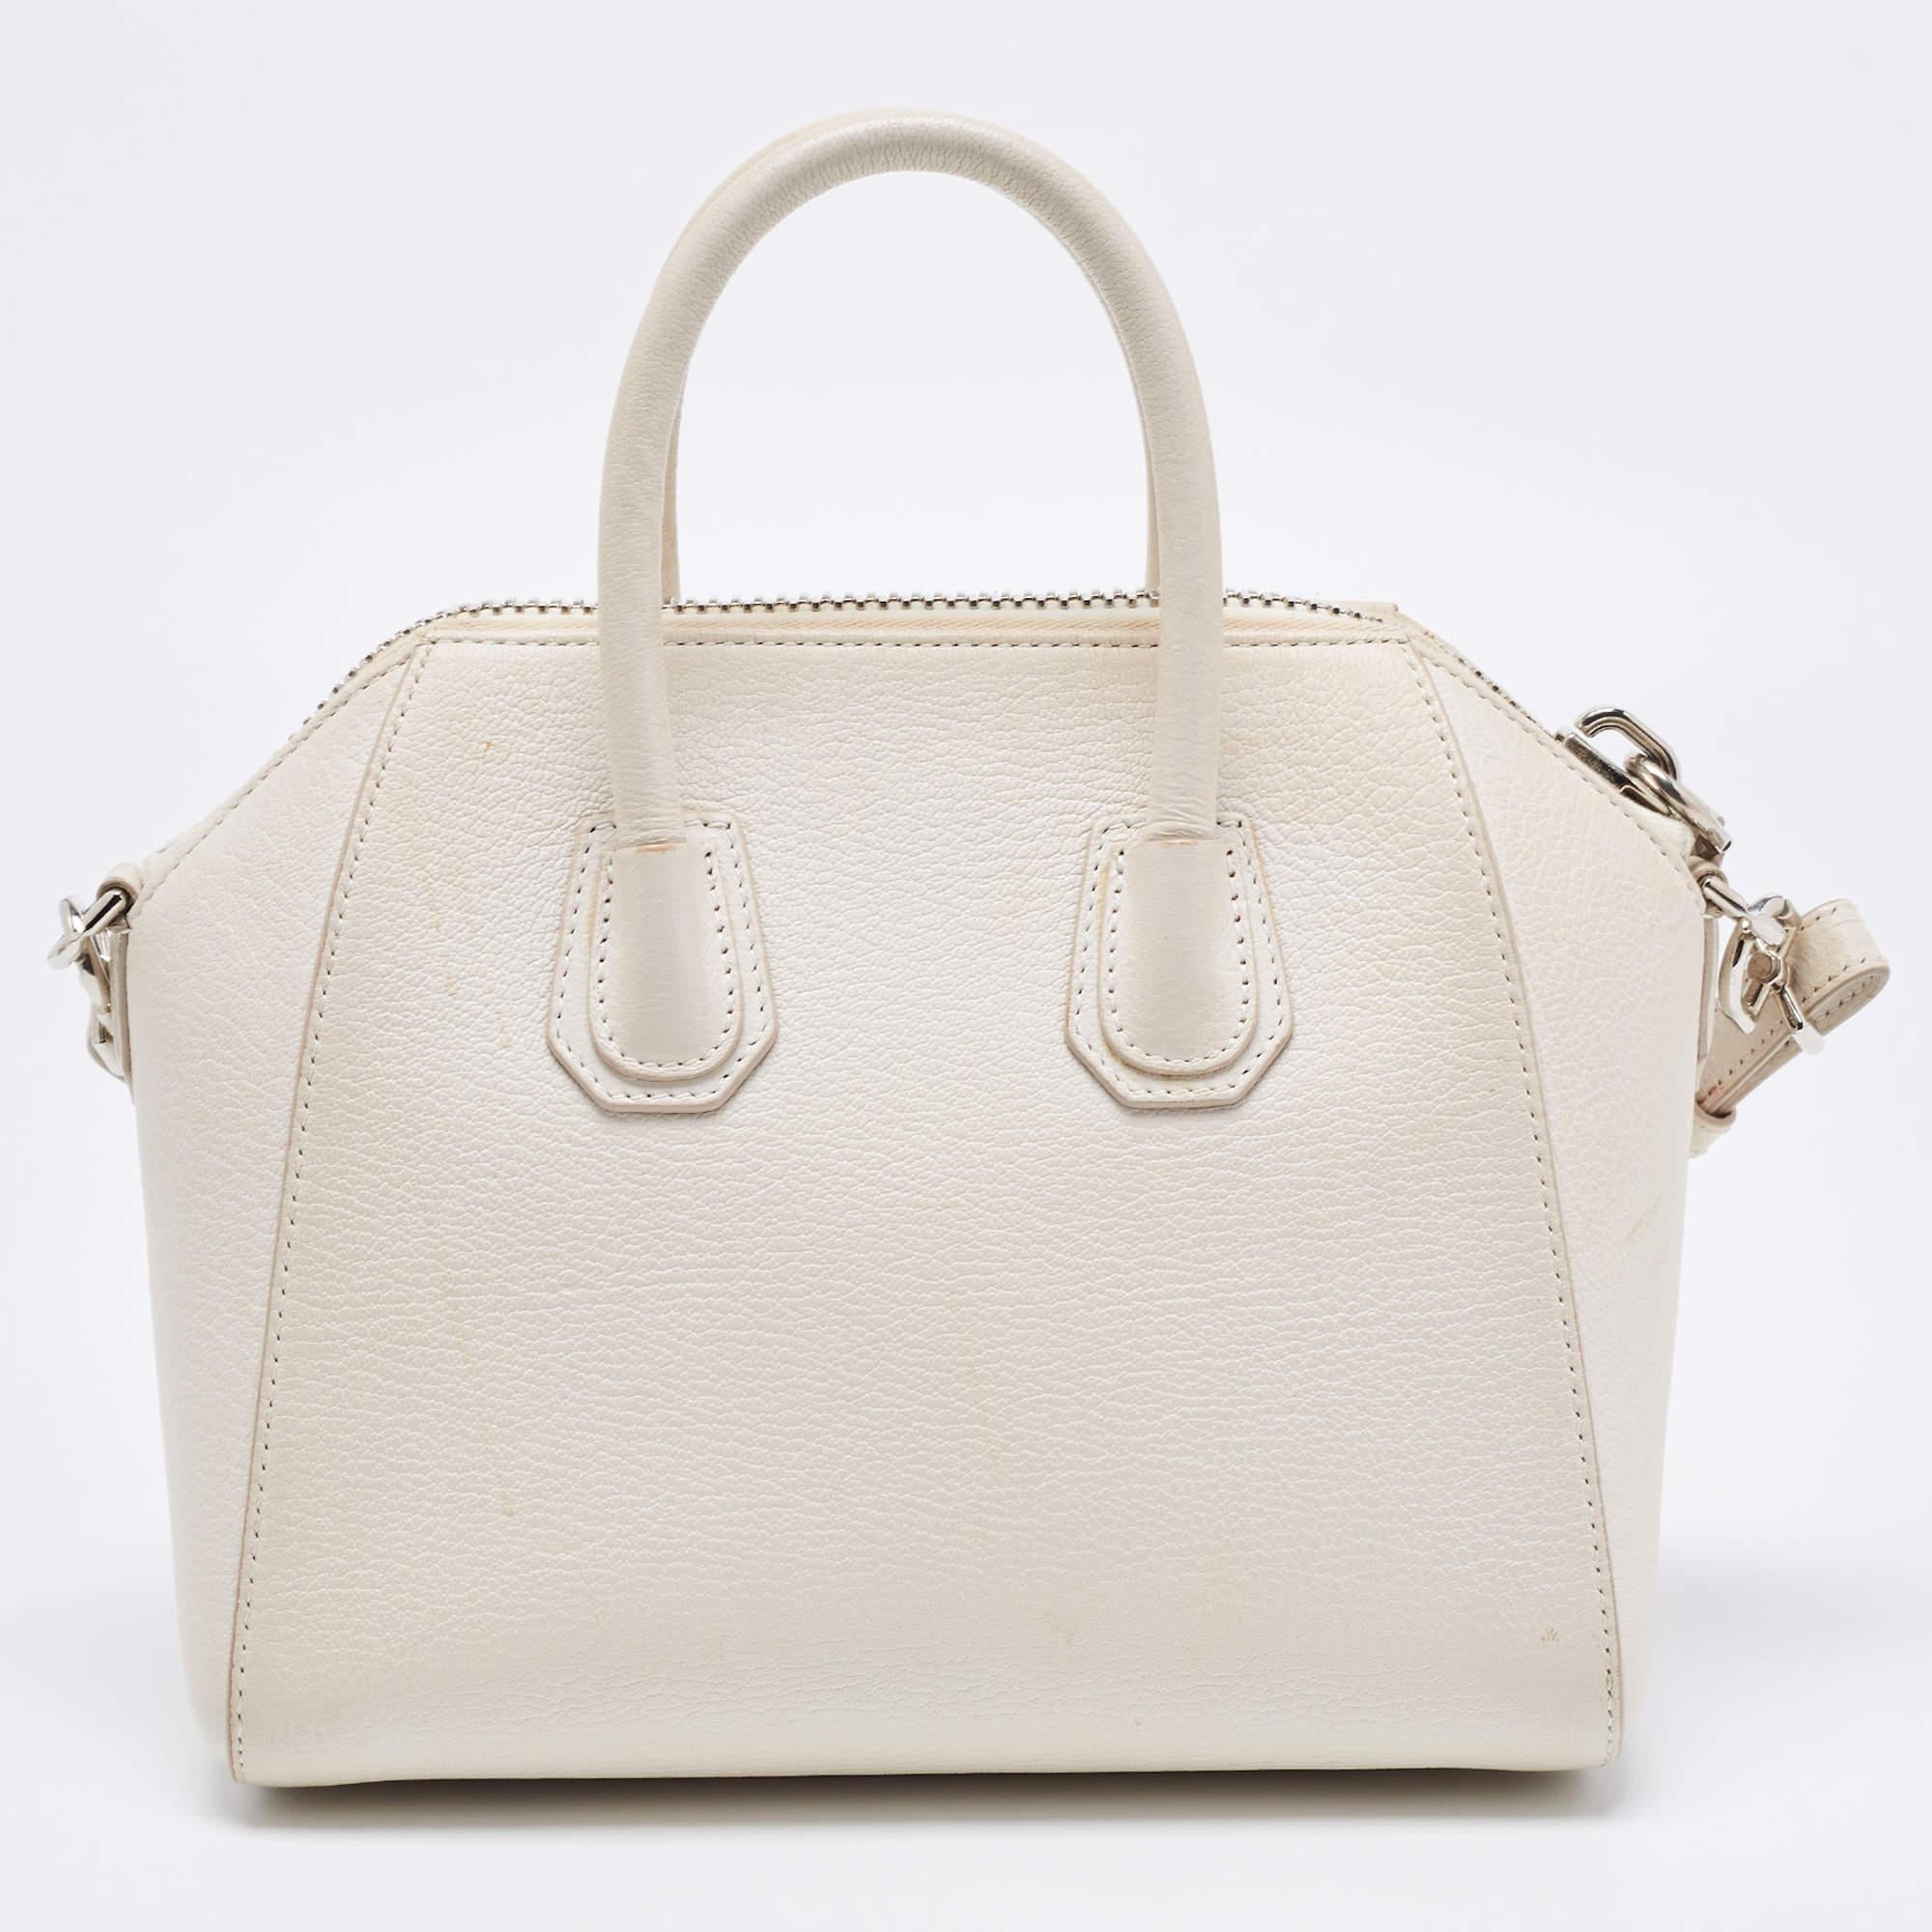 This authentic Givenchy satchel is rendered in the finest quality materials into an elegant design. Versatile and functional, this carryall is well-sized for your daily use.

Includes: Detachable Strap